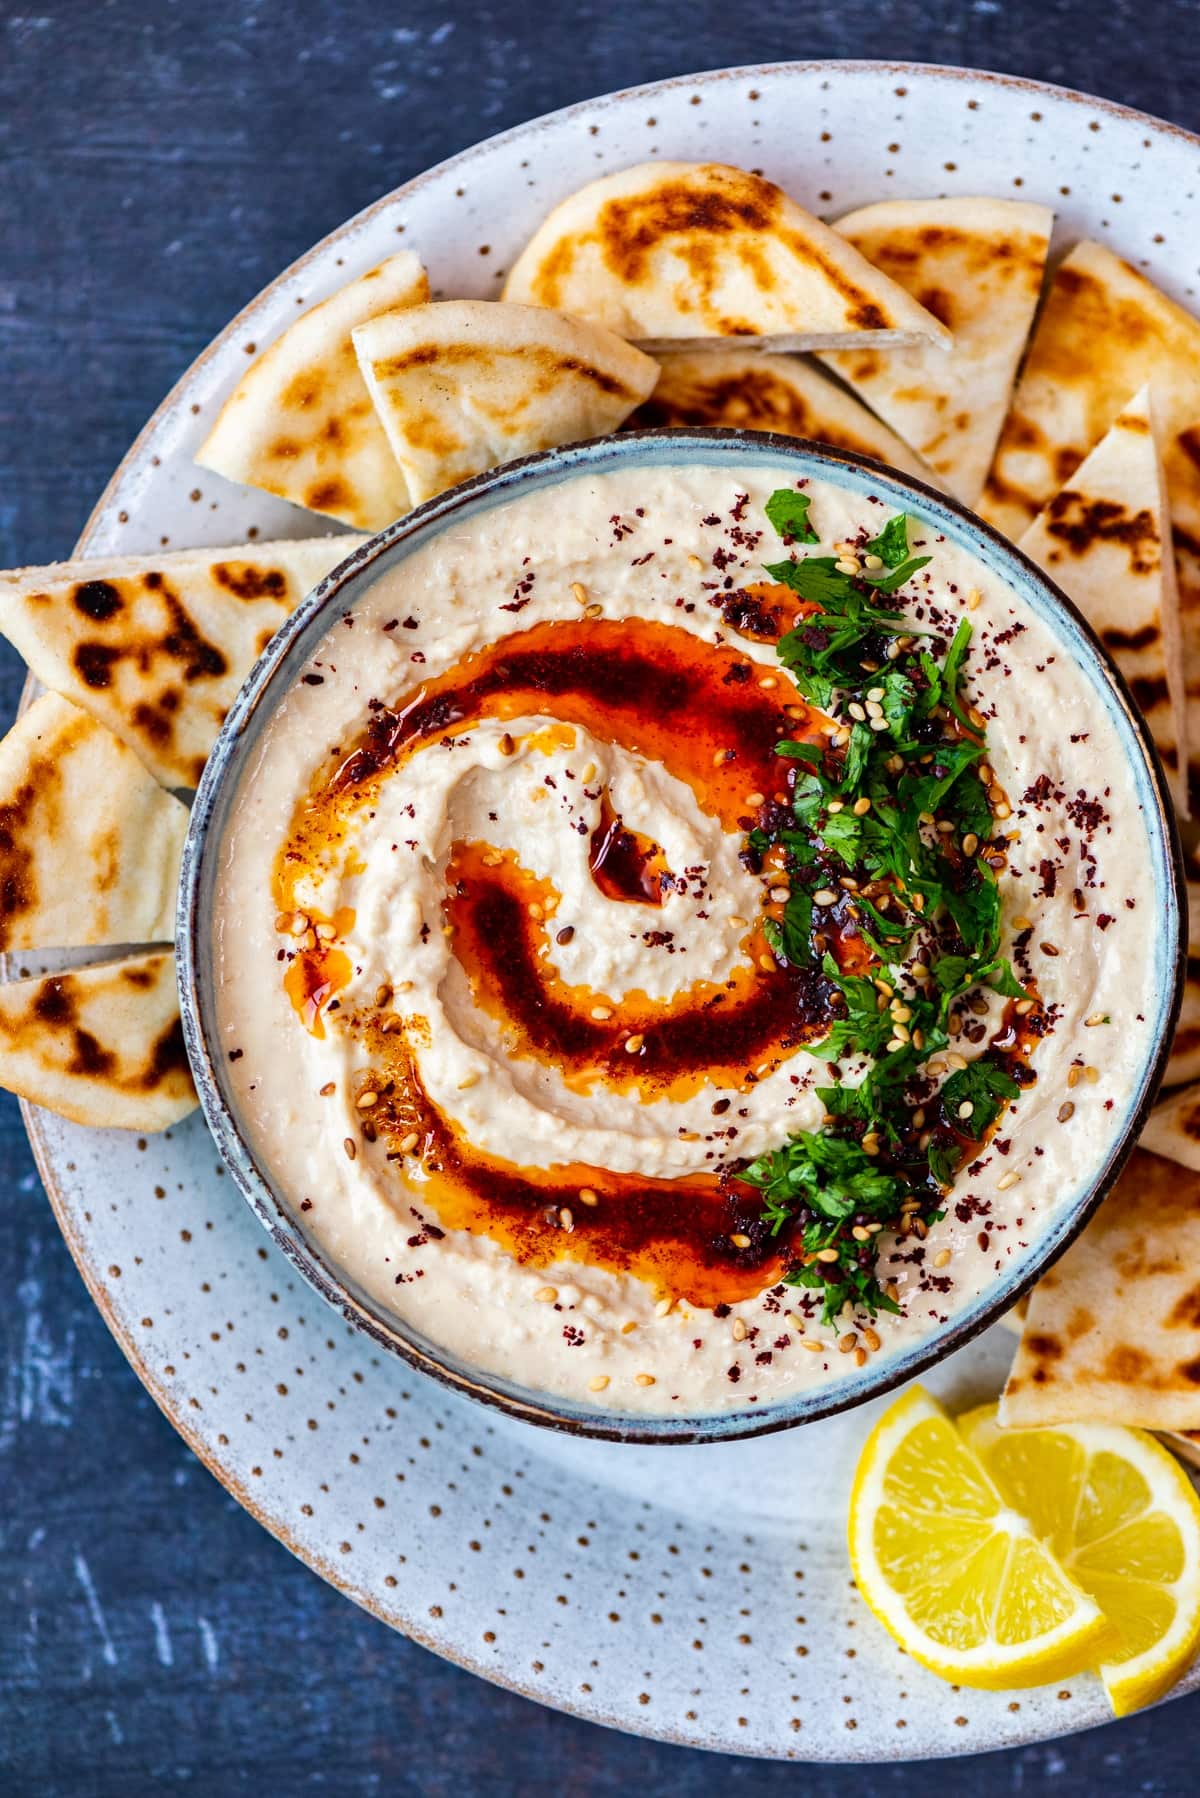 Authentic hummus served in a bowl topped with paprika oil, sumac and parsley. Pide bread chunks and lemon wedges on the side.